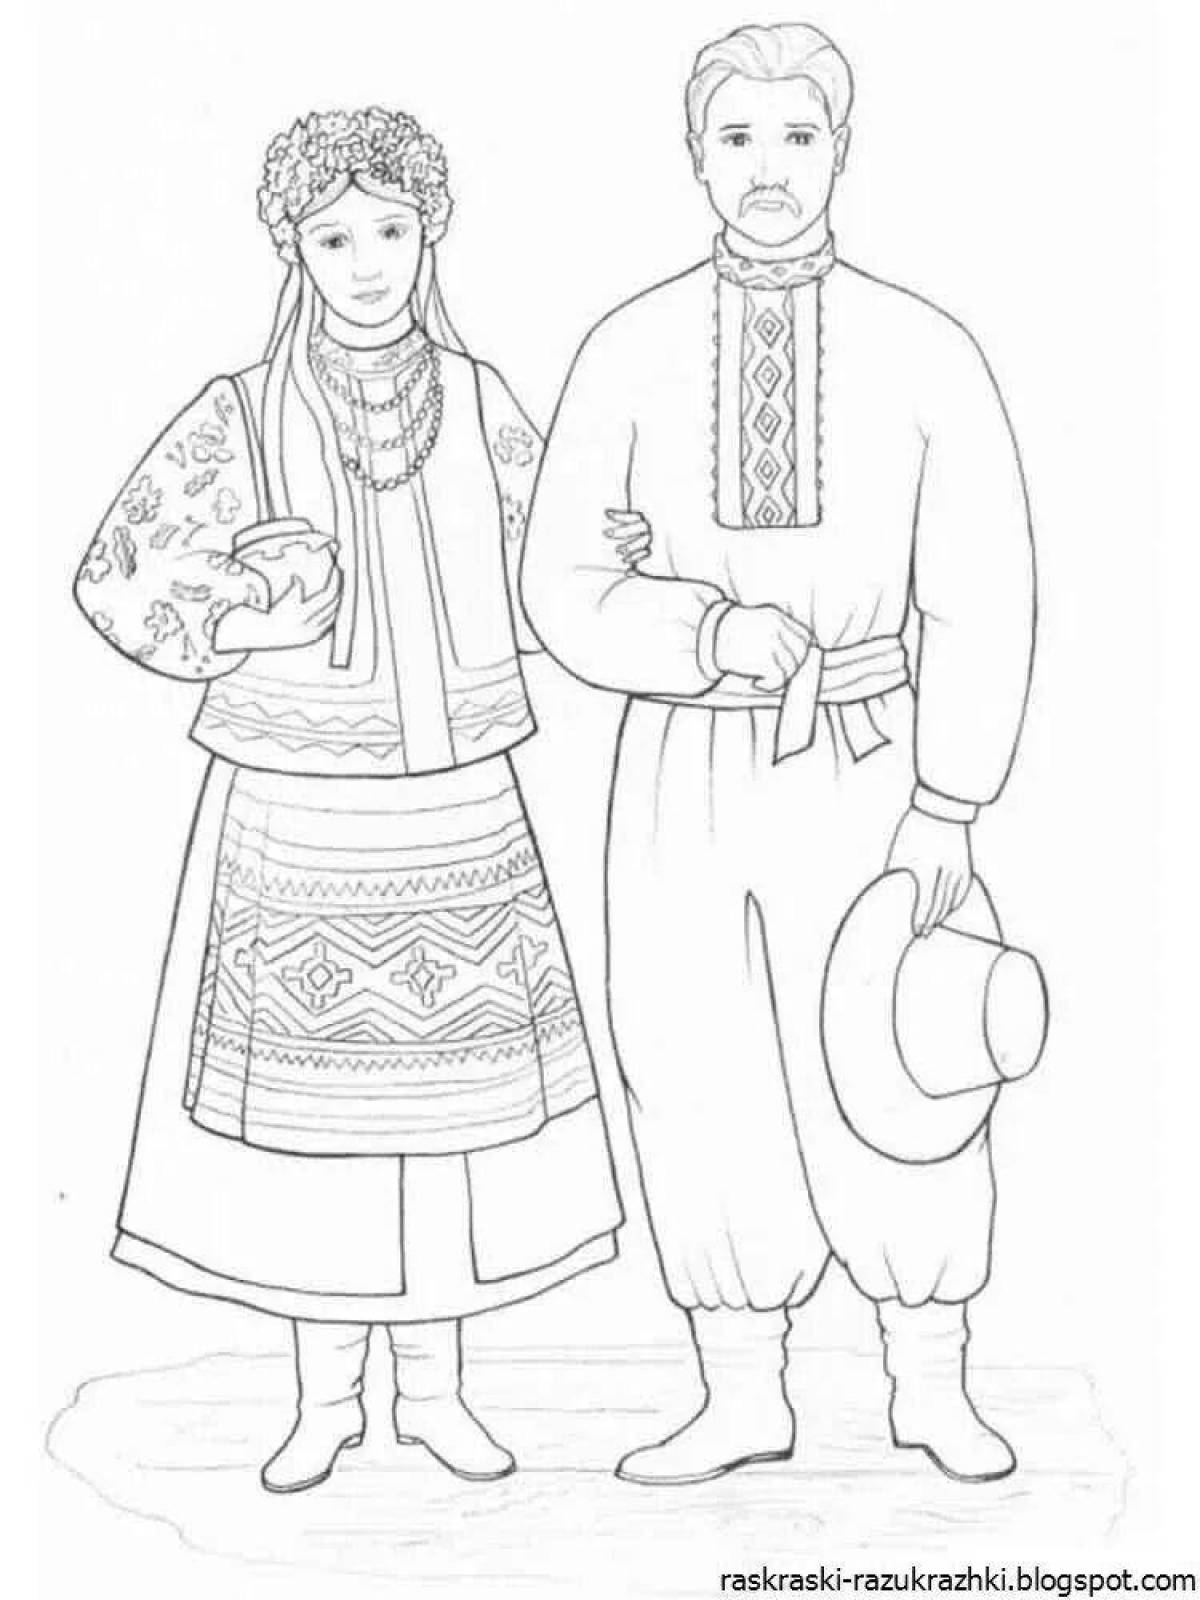 Coloring page lush Russian folk clothes